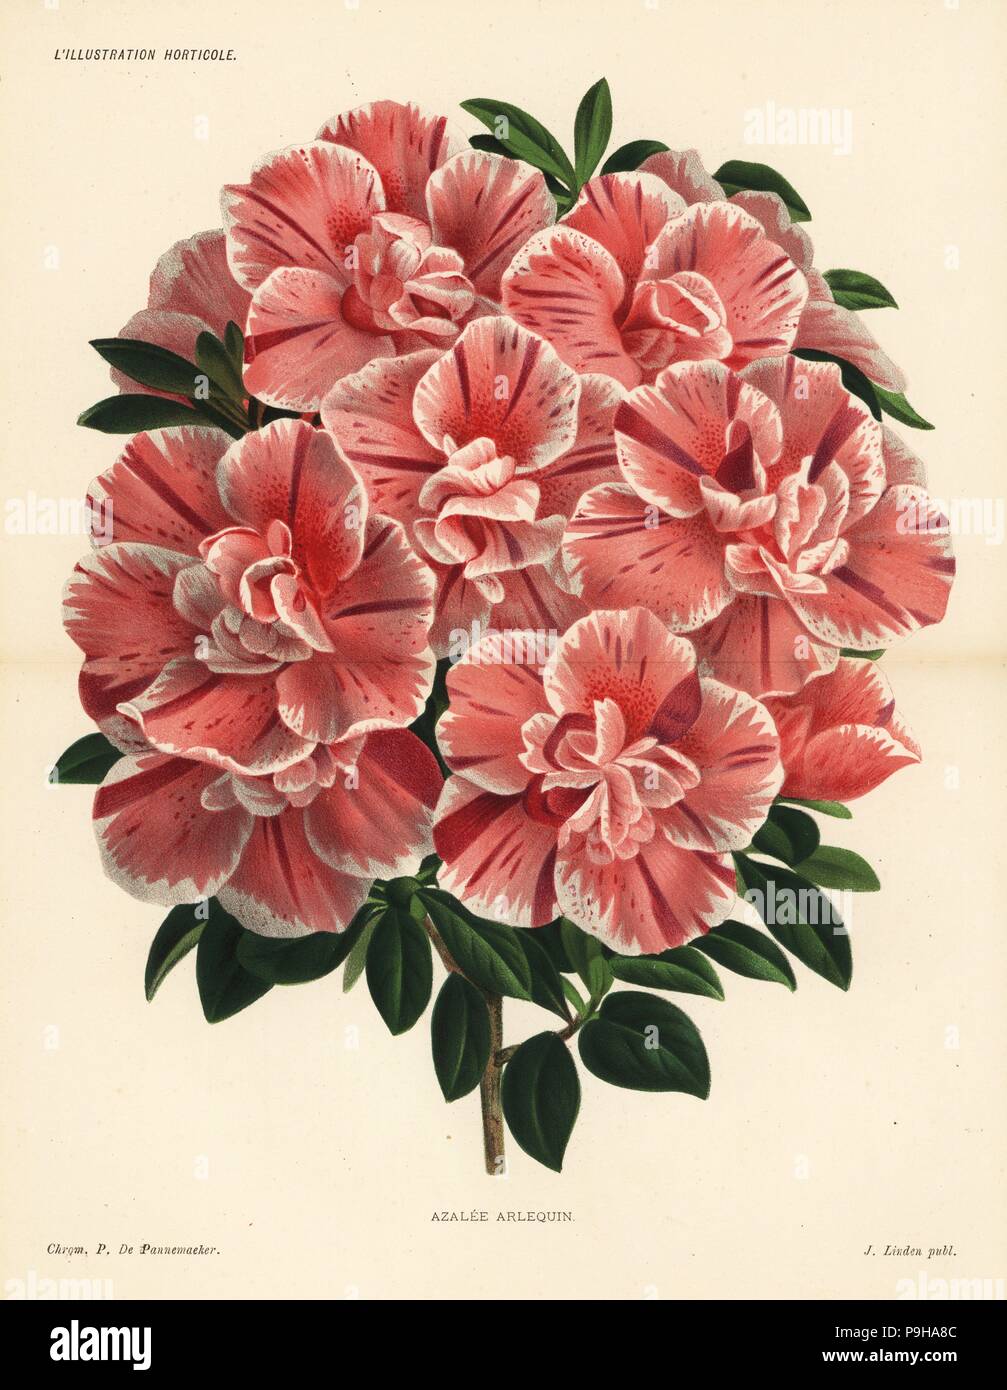 Harlequin azalea hybrid, Rhododendron indica. Chromolithograph by Pieter de Pannemaeker from Jean Linden's l'Illustration Horticole, Brussels, 1885. Stock Photo